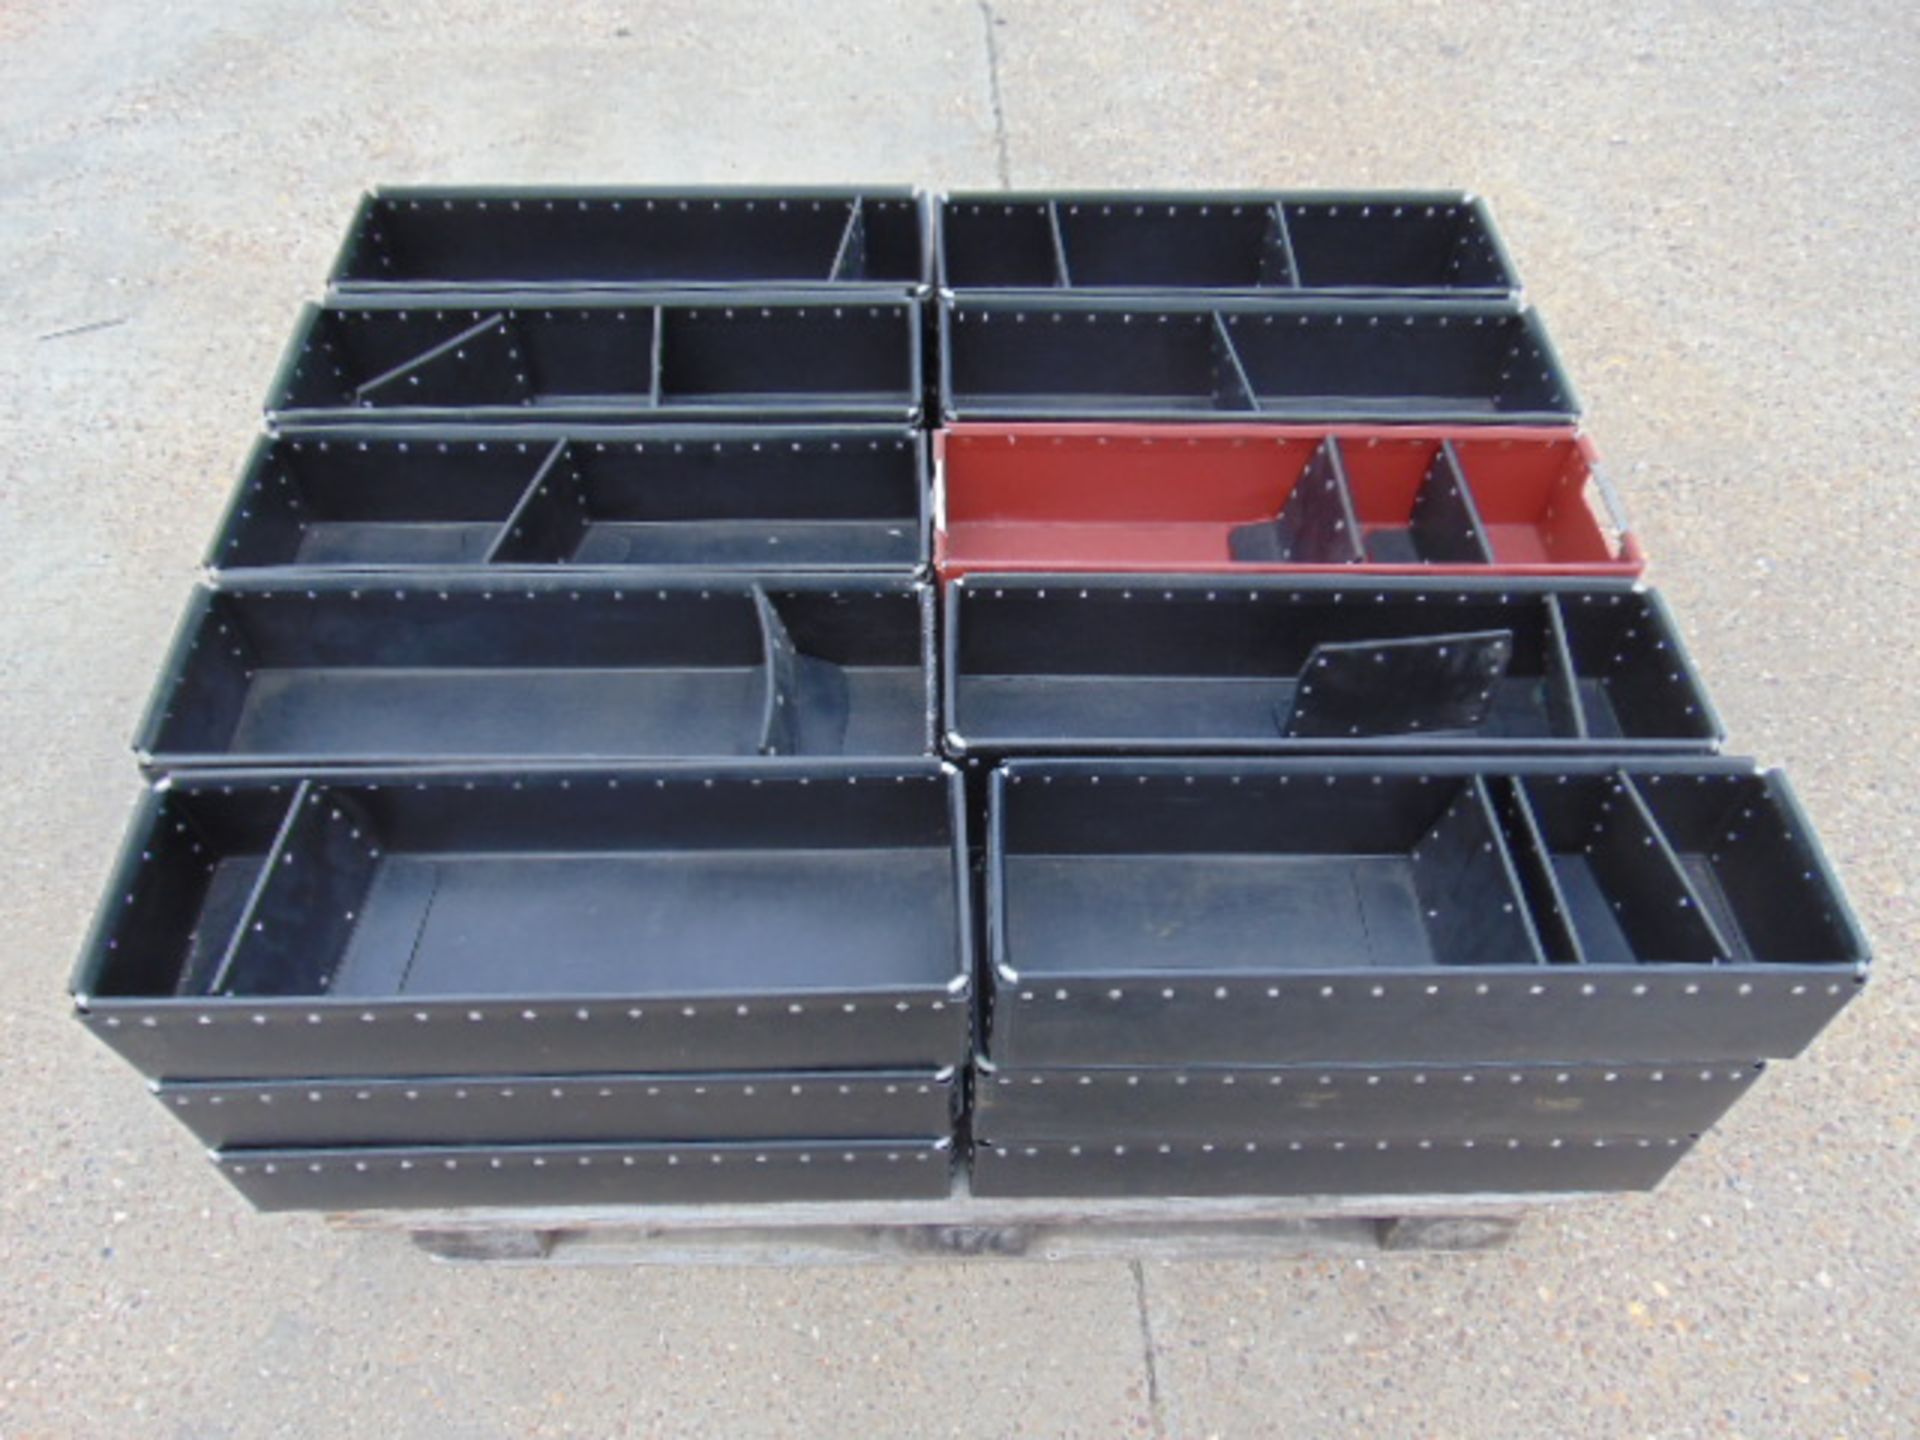 30 x Heavy Duty Tote Storage Boxes with Dividers - Image 3 of 8